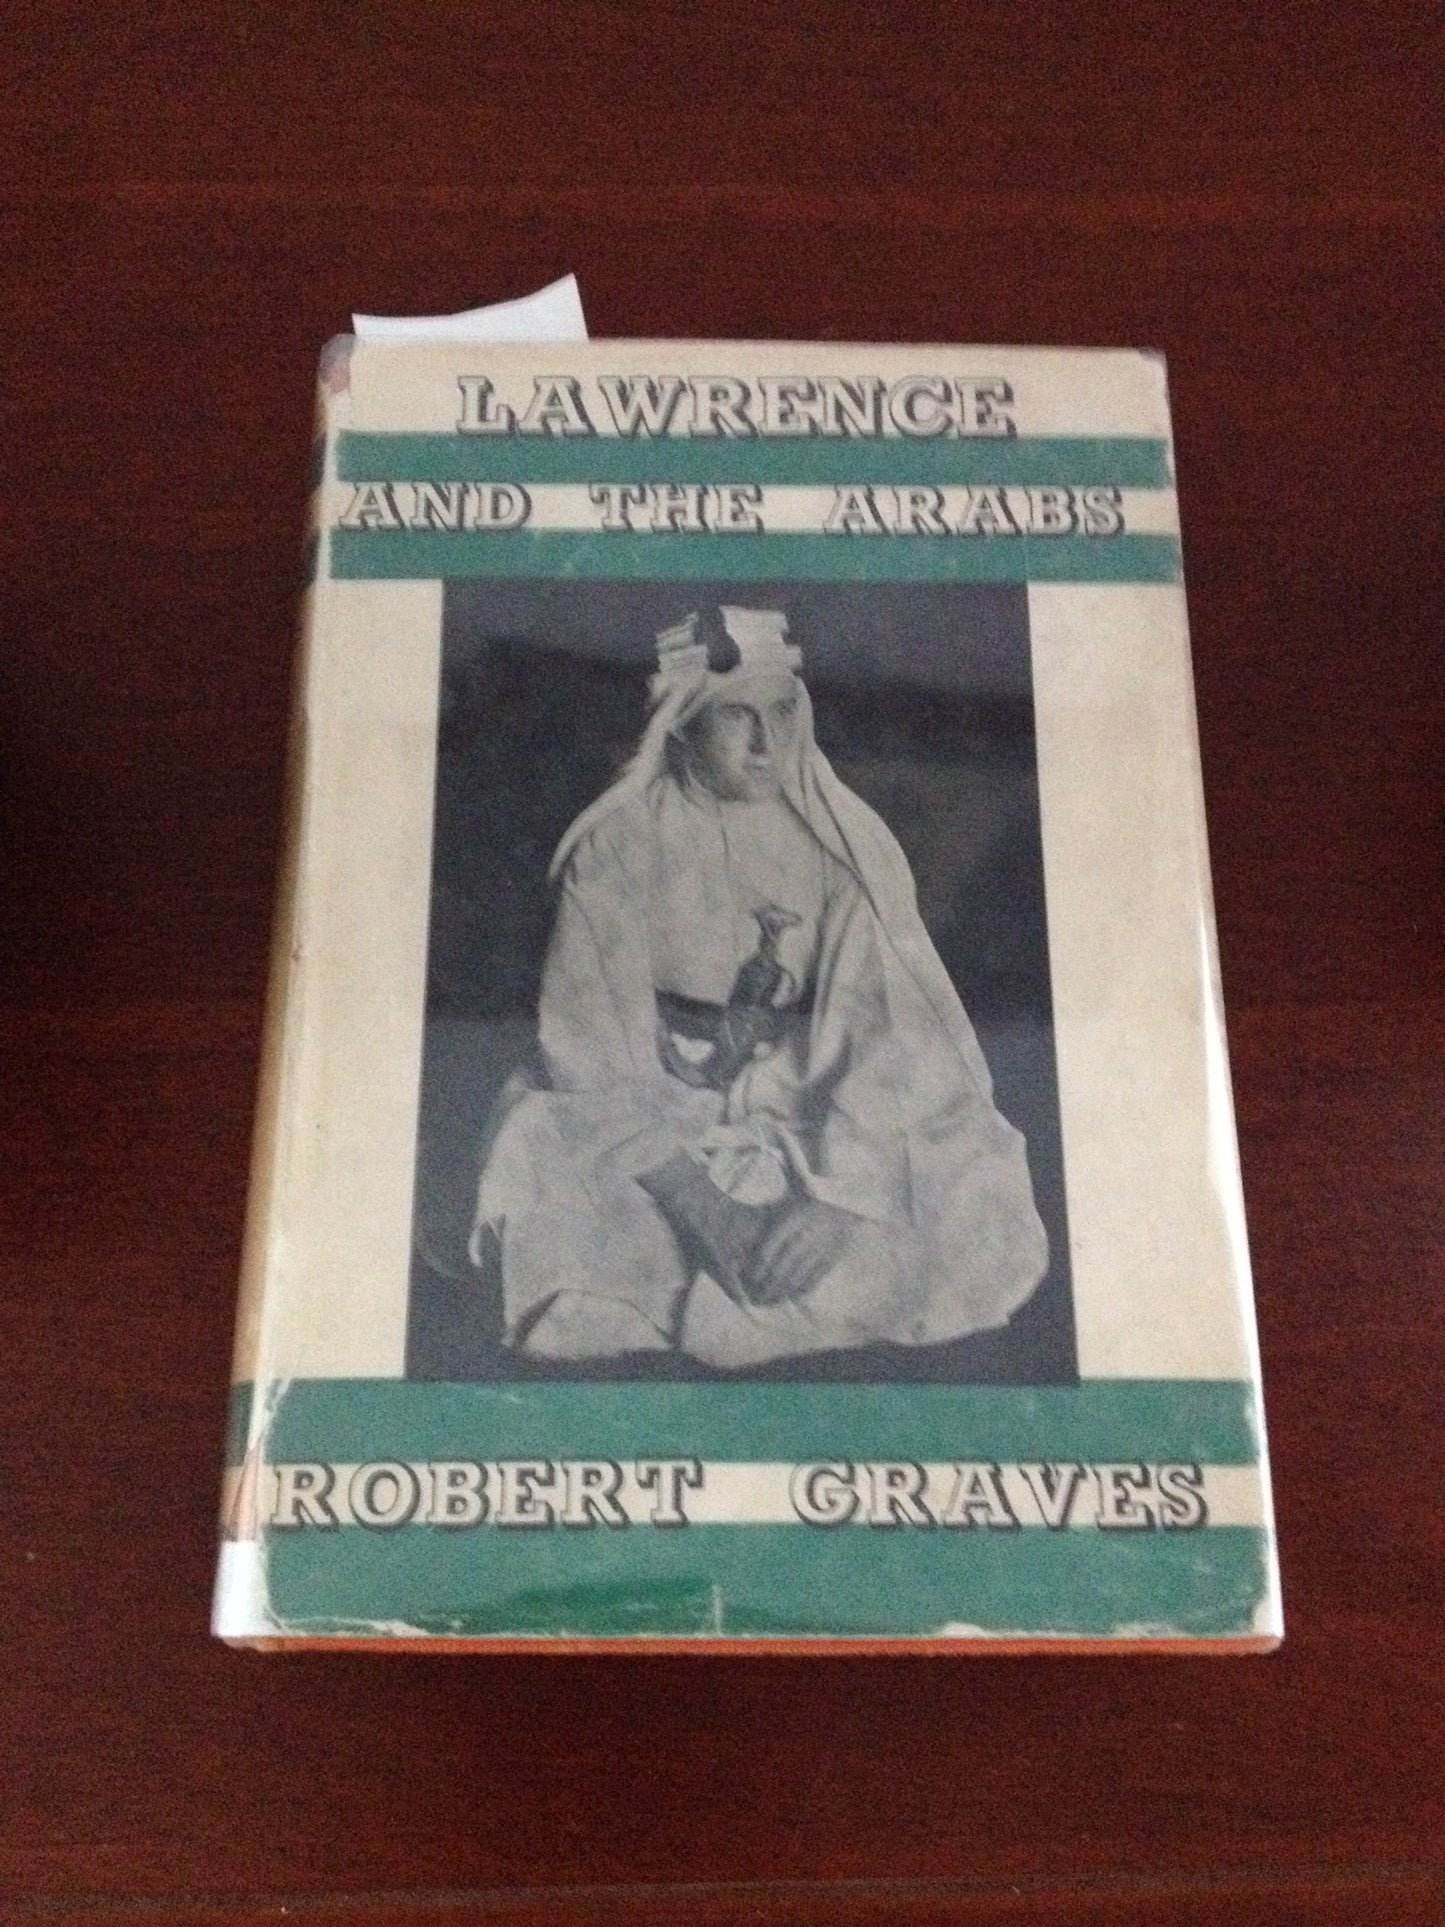 LAWRENCE AND THE ARABS - ROBERT GRAVES